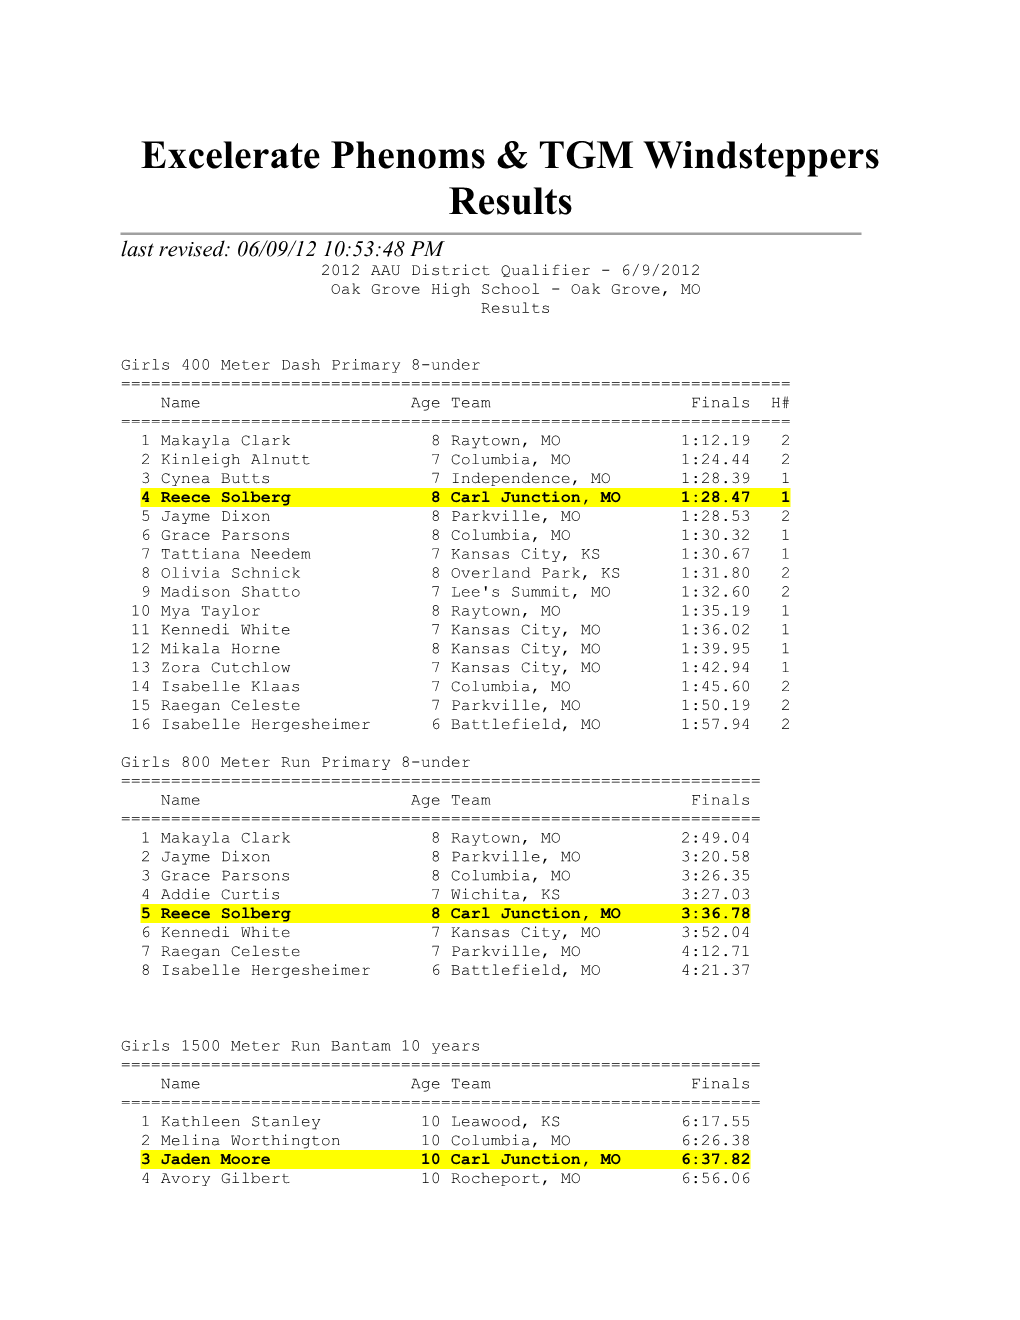 Excelerate Phenoms & TGM Windsteppers Results